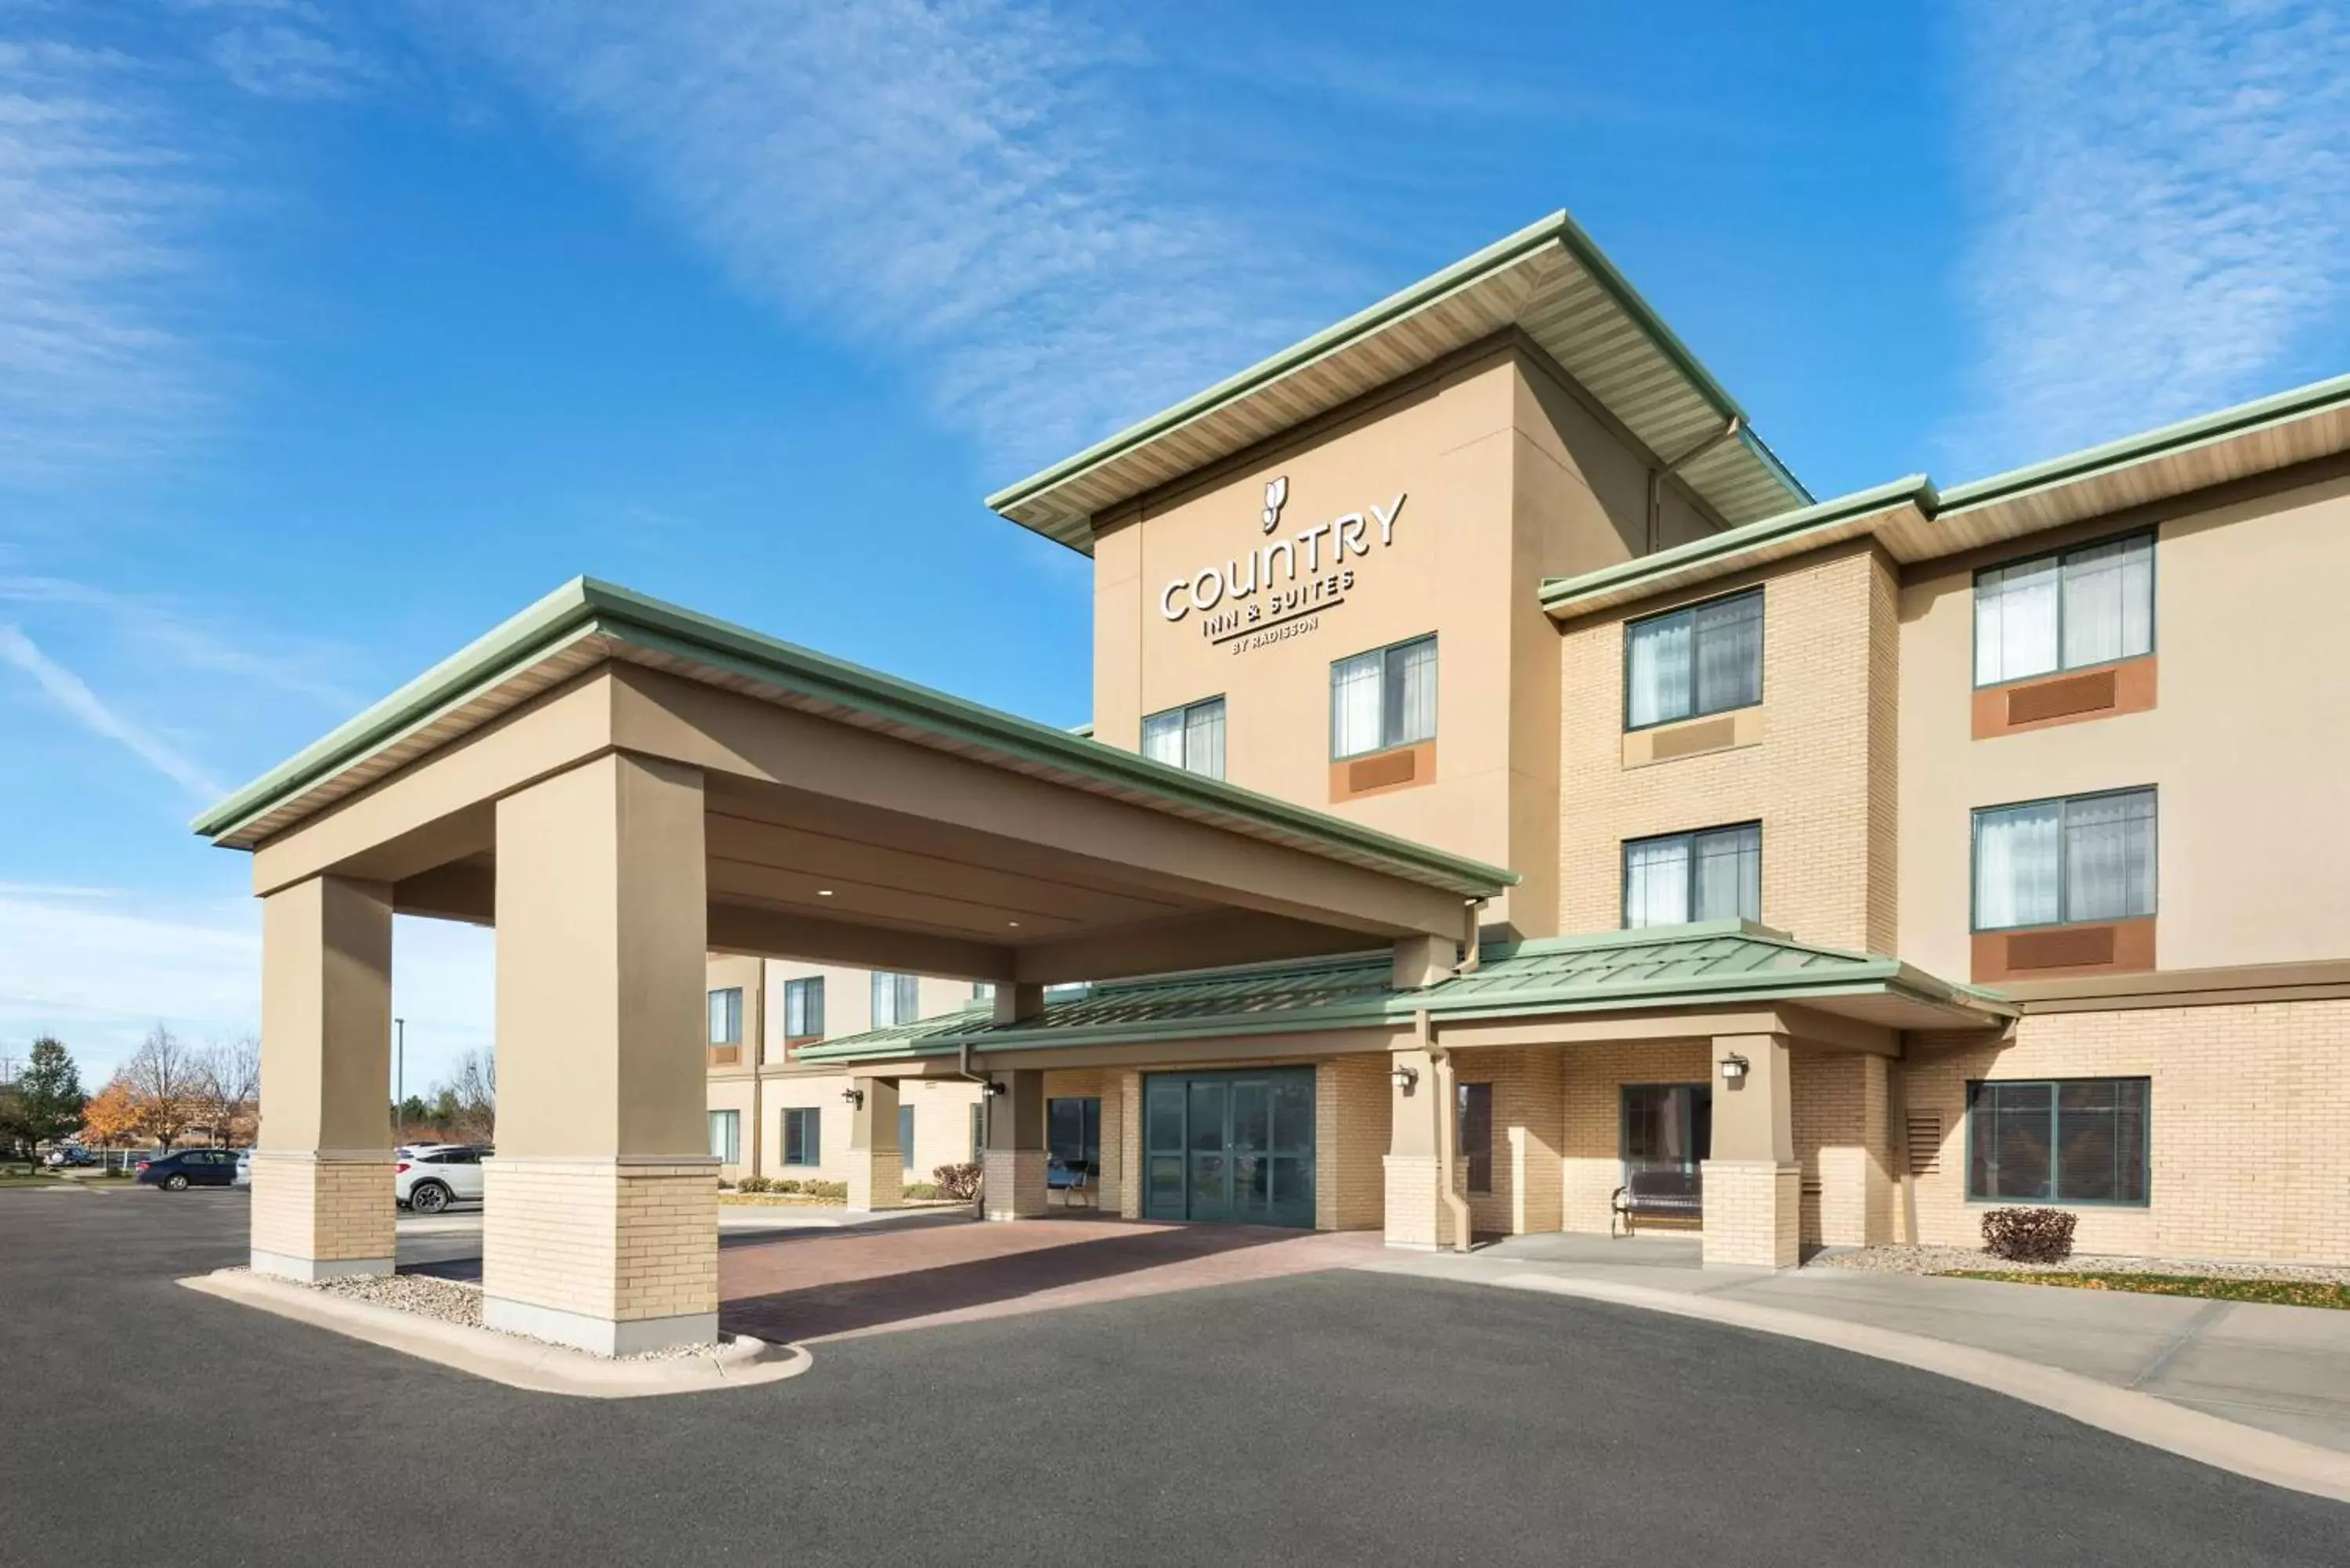 Property building in Country Inn & Suites by Radisson, Madison West, WI